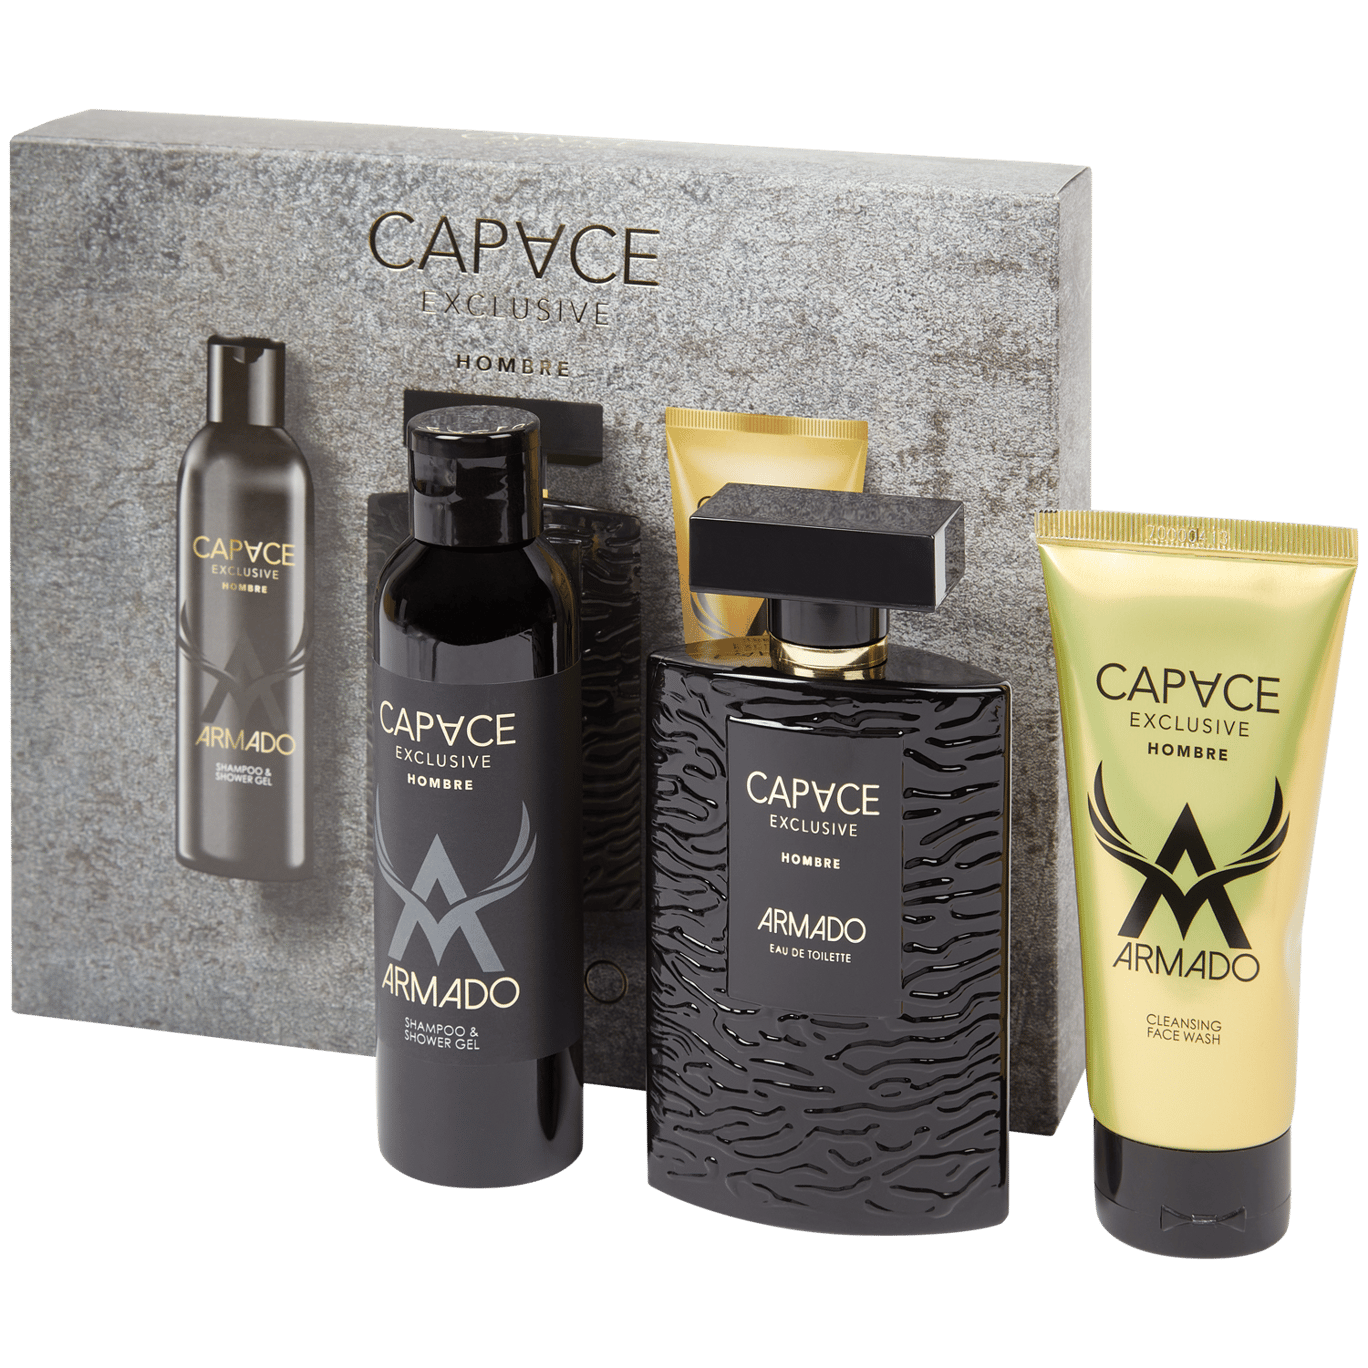 Capace Exclusive Hombre giftset